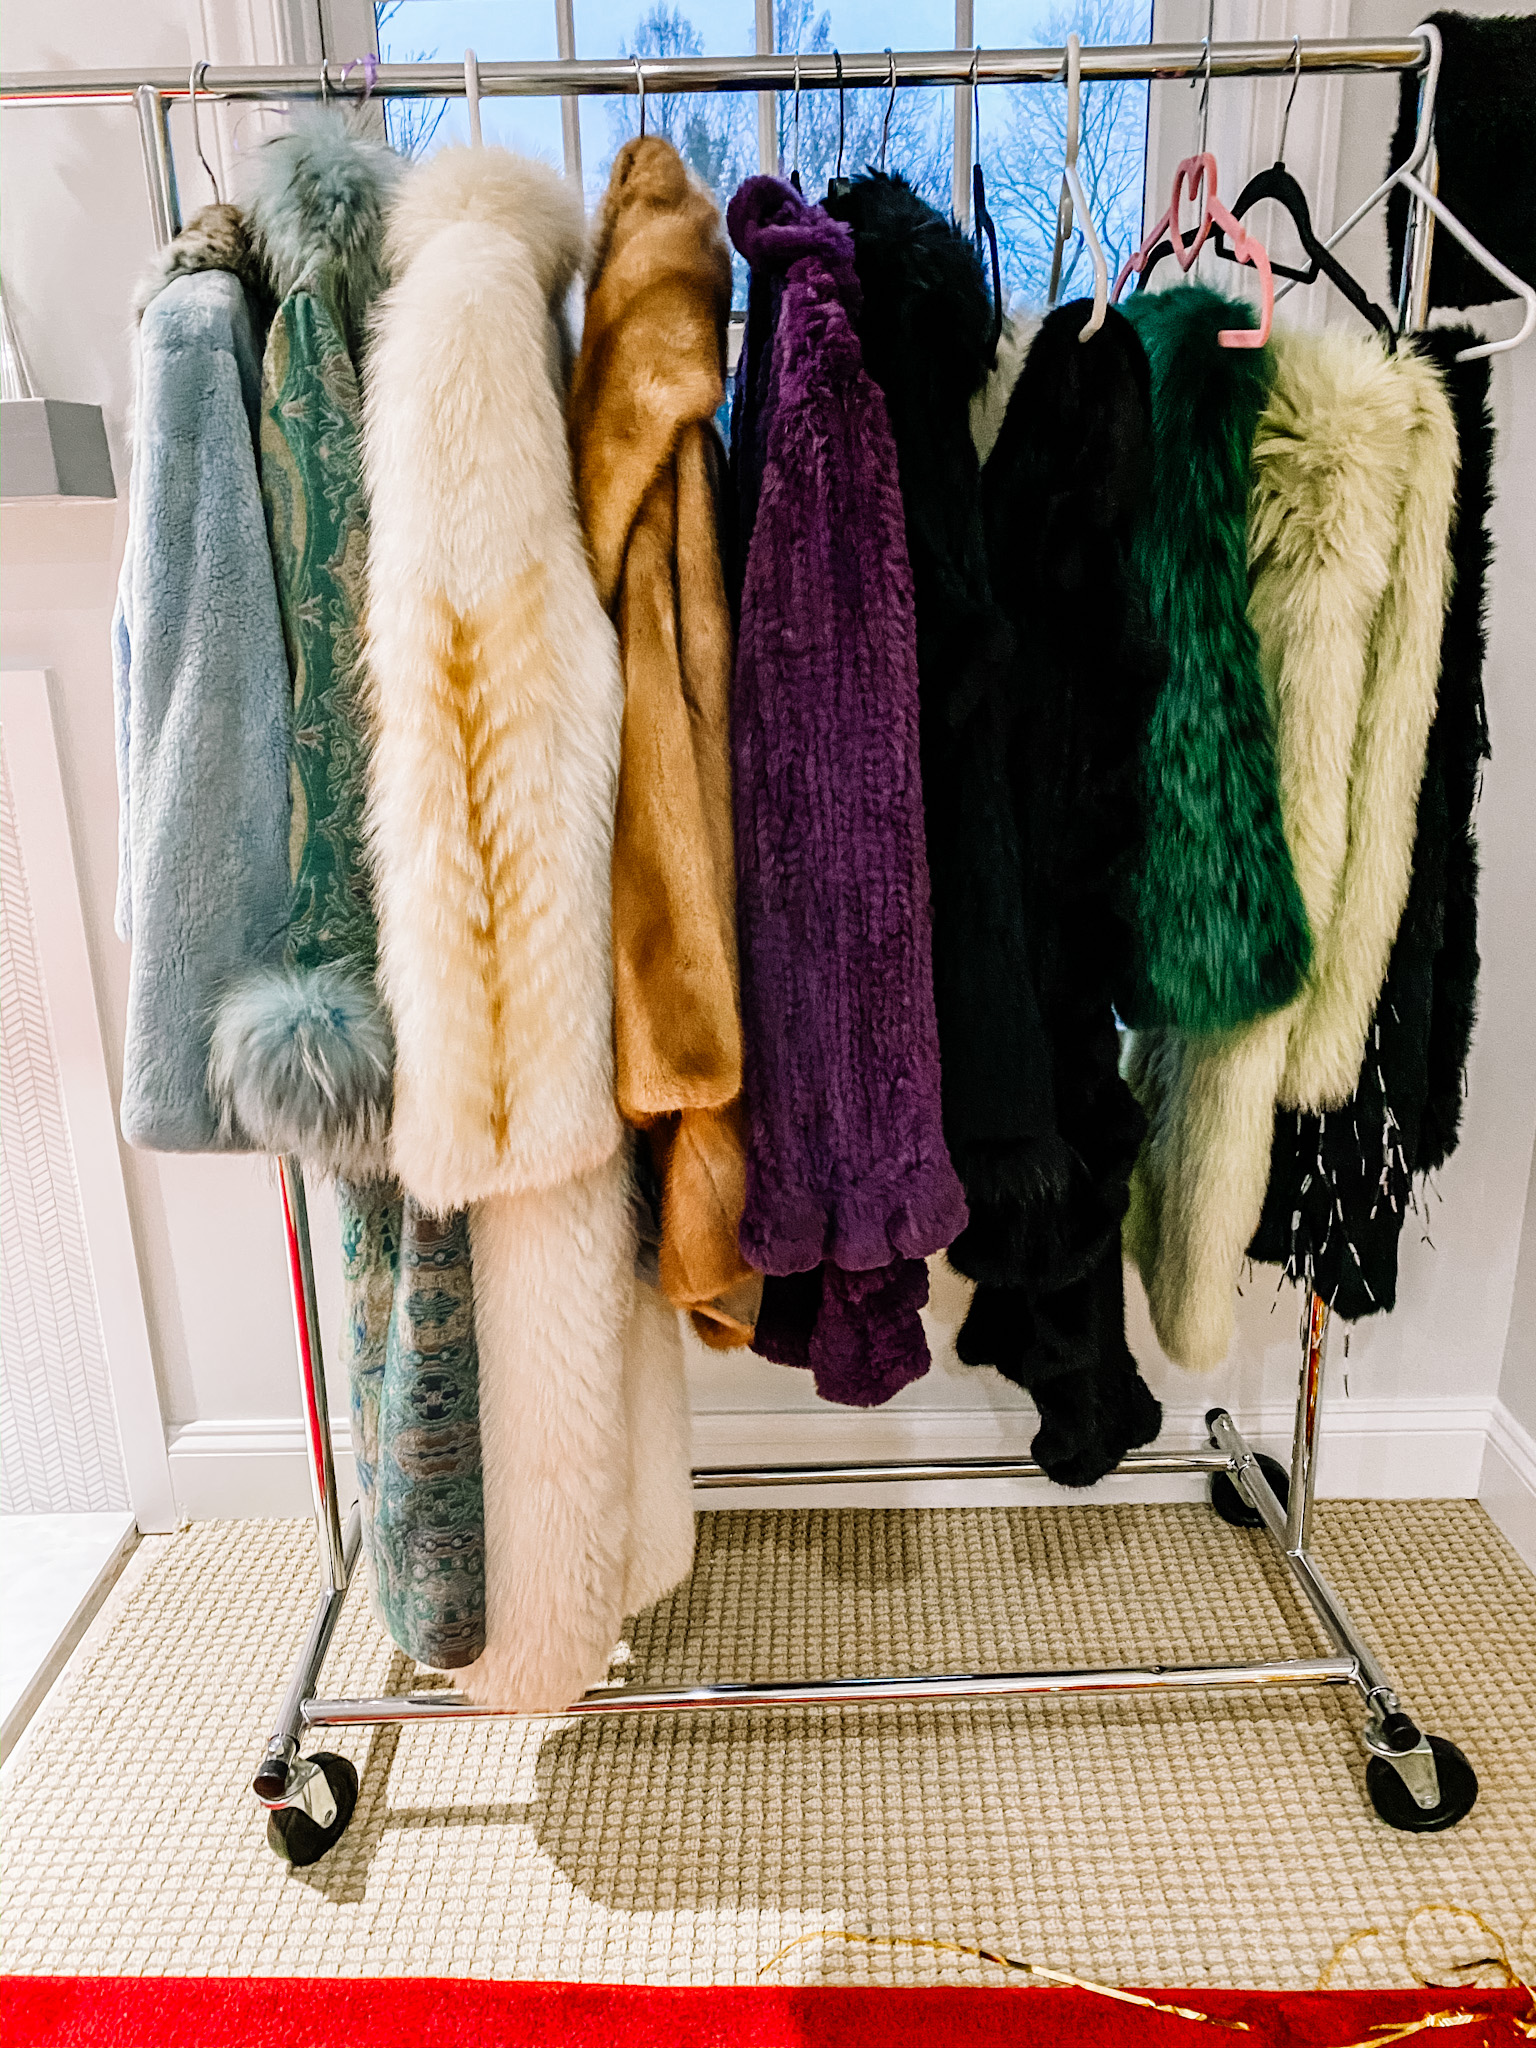 A rack of glamorous furs to try on for an Old Hollywood book club or Oscar party.